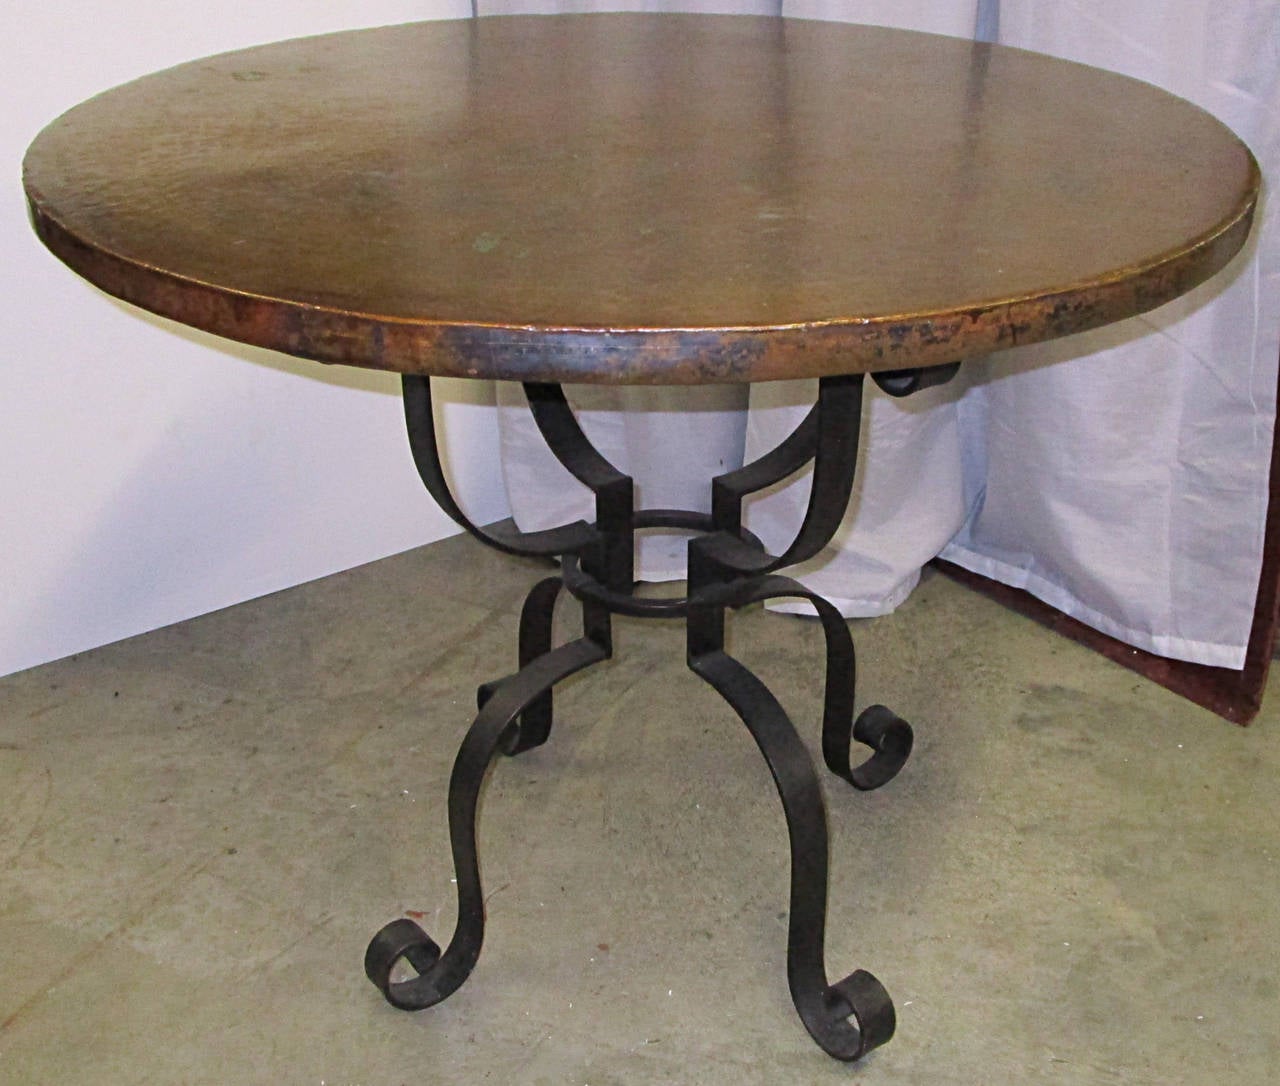 Simple and elegant occasional copper top table. Hour glass form, four point black steel base with curl details. Warm coloration to copper.